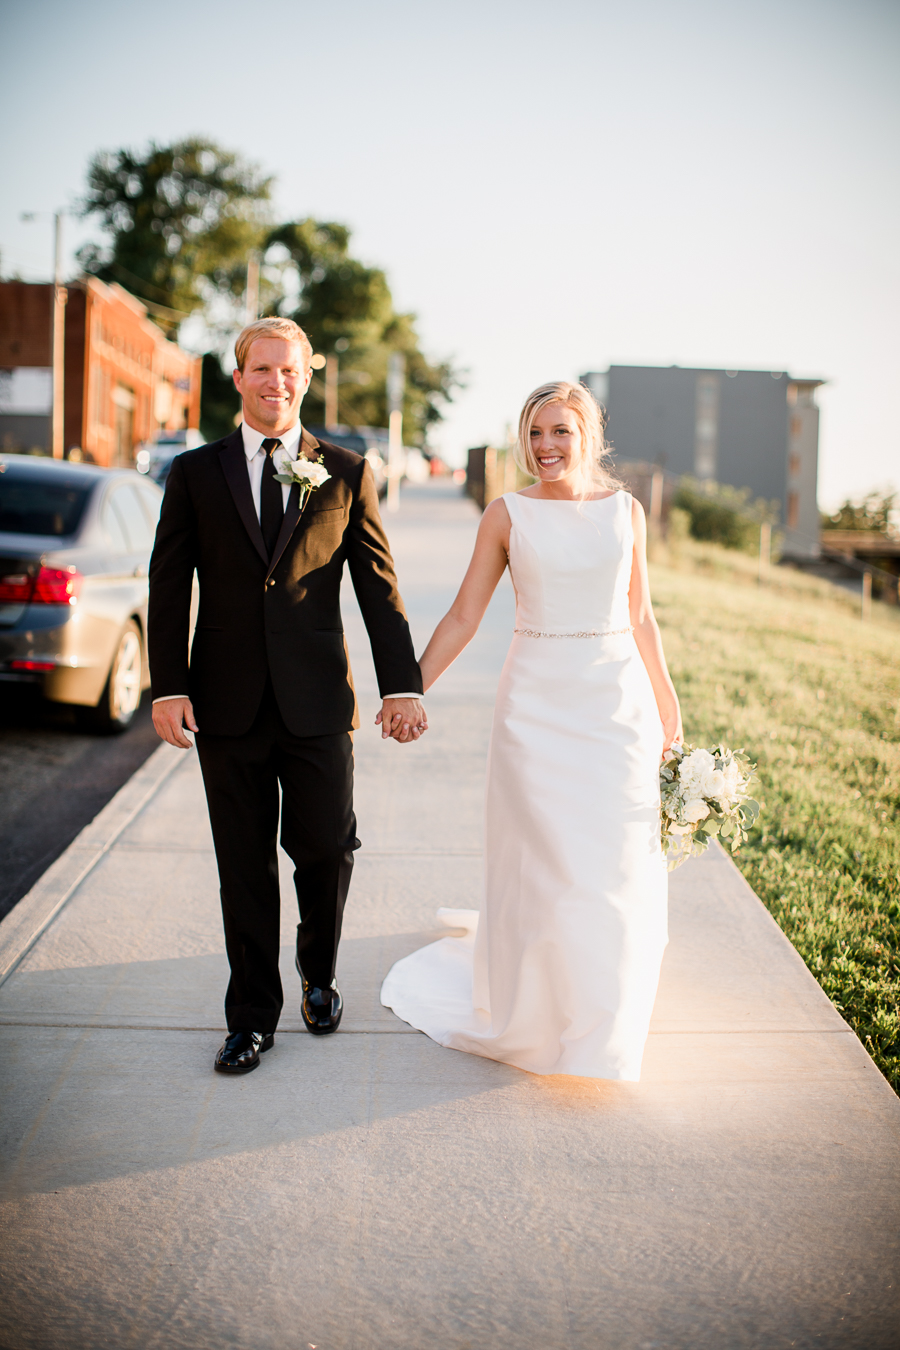 Walking holding hands outside at this wedding at The Standard by Knoxville Wedding Photographer, Amanda May Photos.